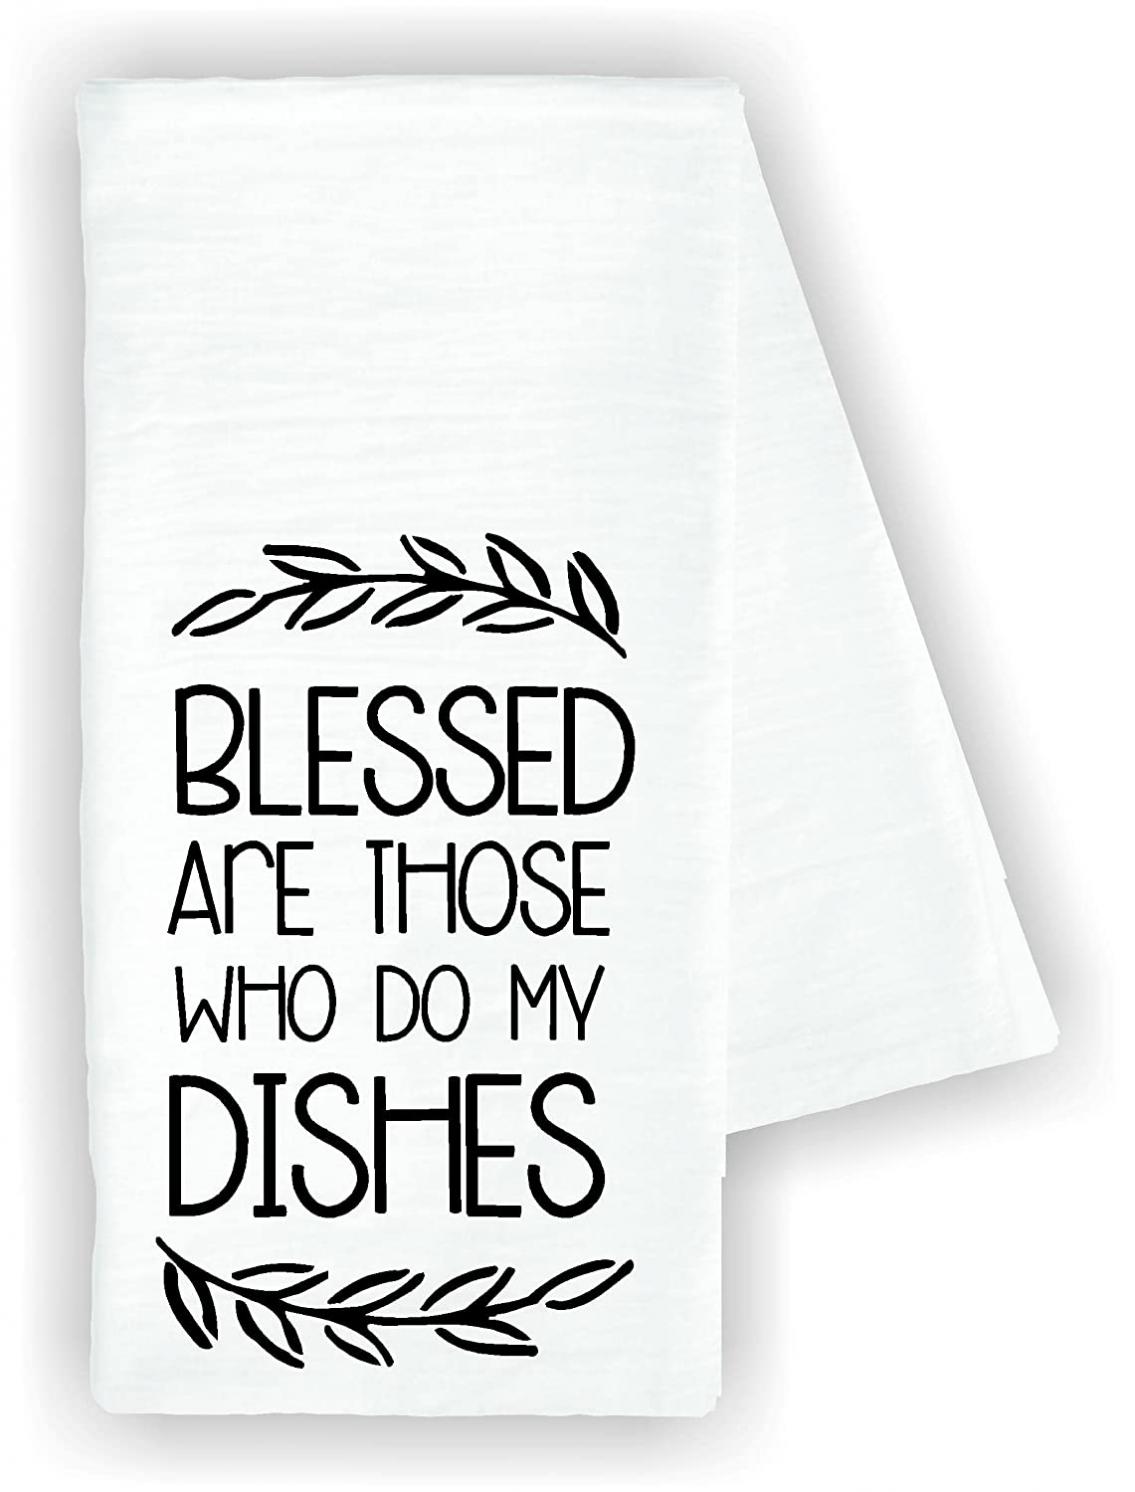 Kitchen dish towel Blessed are those who do my dishes funny cute Decor drying cloth…100% COTTON